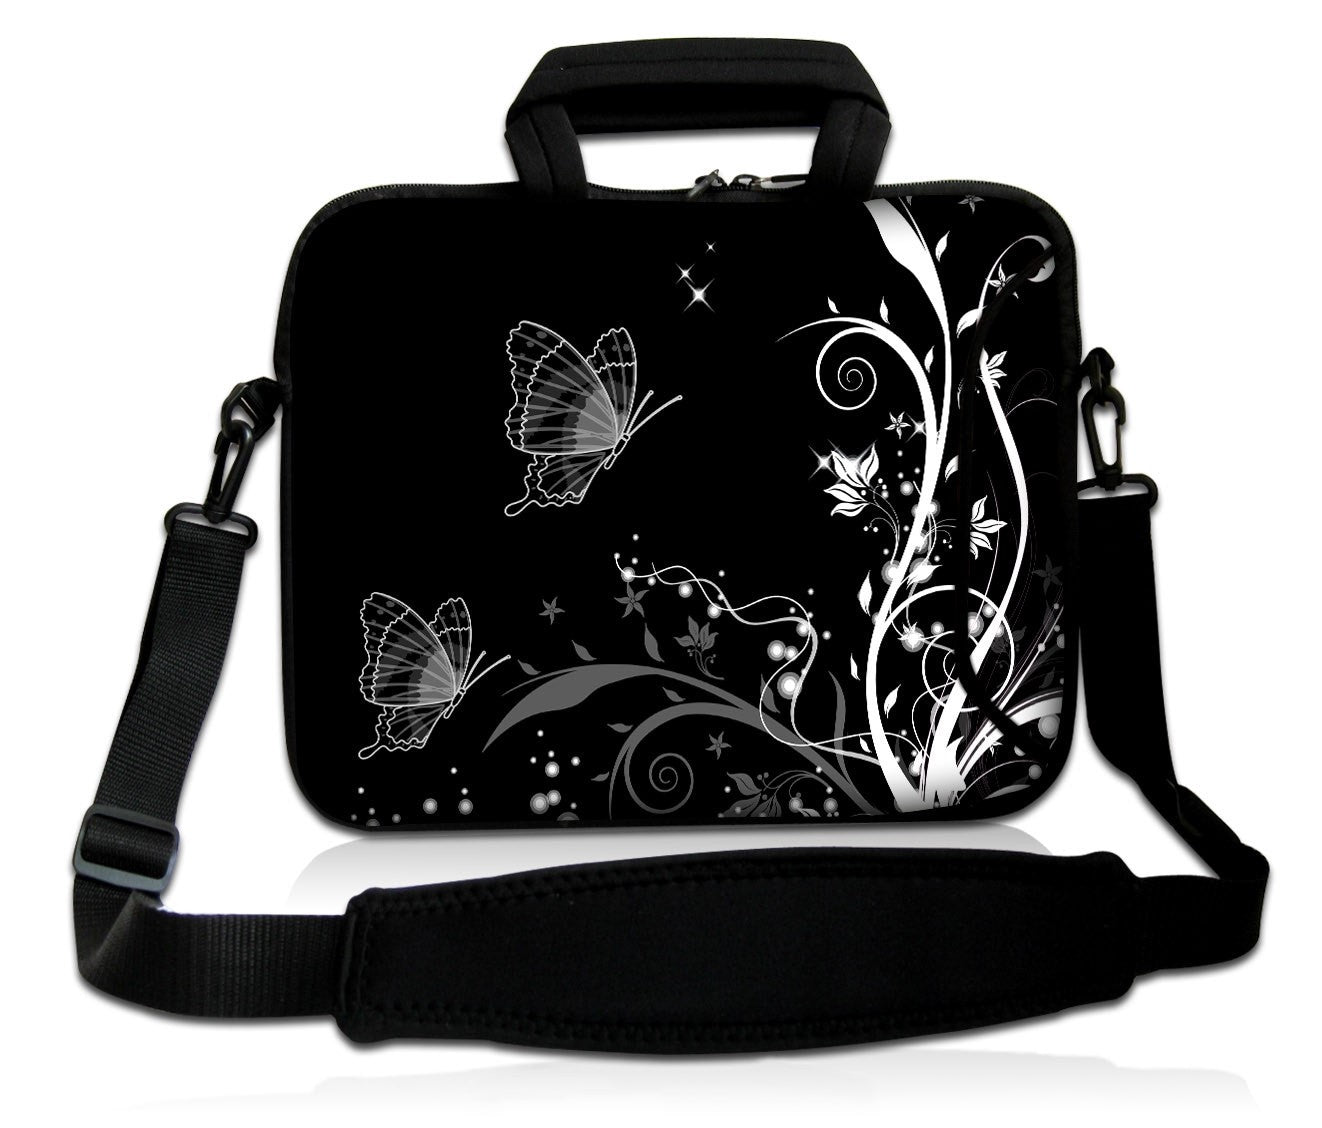 15"- 15.6" (inch) LAPTOP BAG CARRY CASE/BAG WITH HANDLE & STRAP NEOPRENE FOR LAPTOPS/NOTEBOOKS, *BLACK2B*